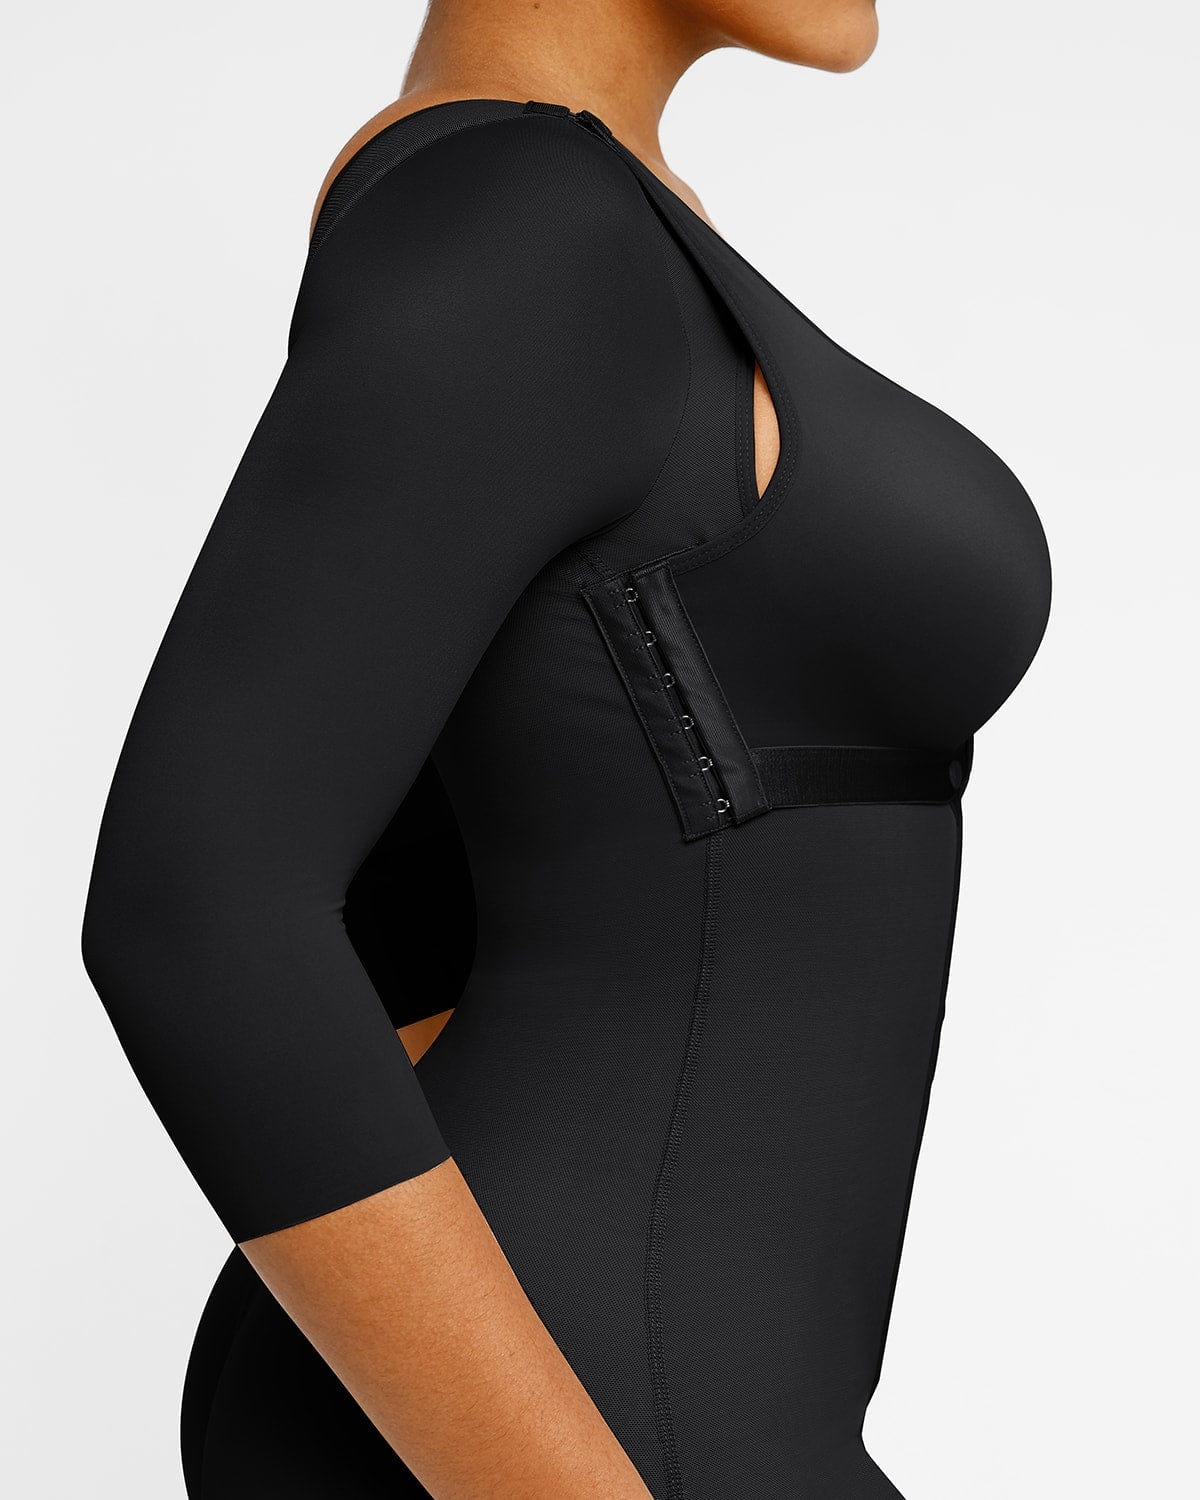 I think I found the perfect shapewear by @shopshapellx…the AirSlim